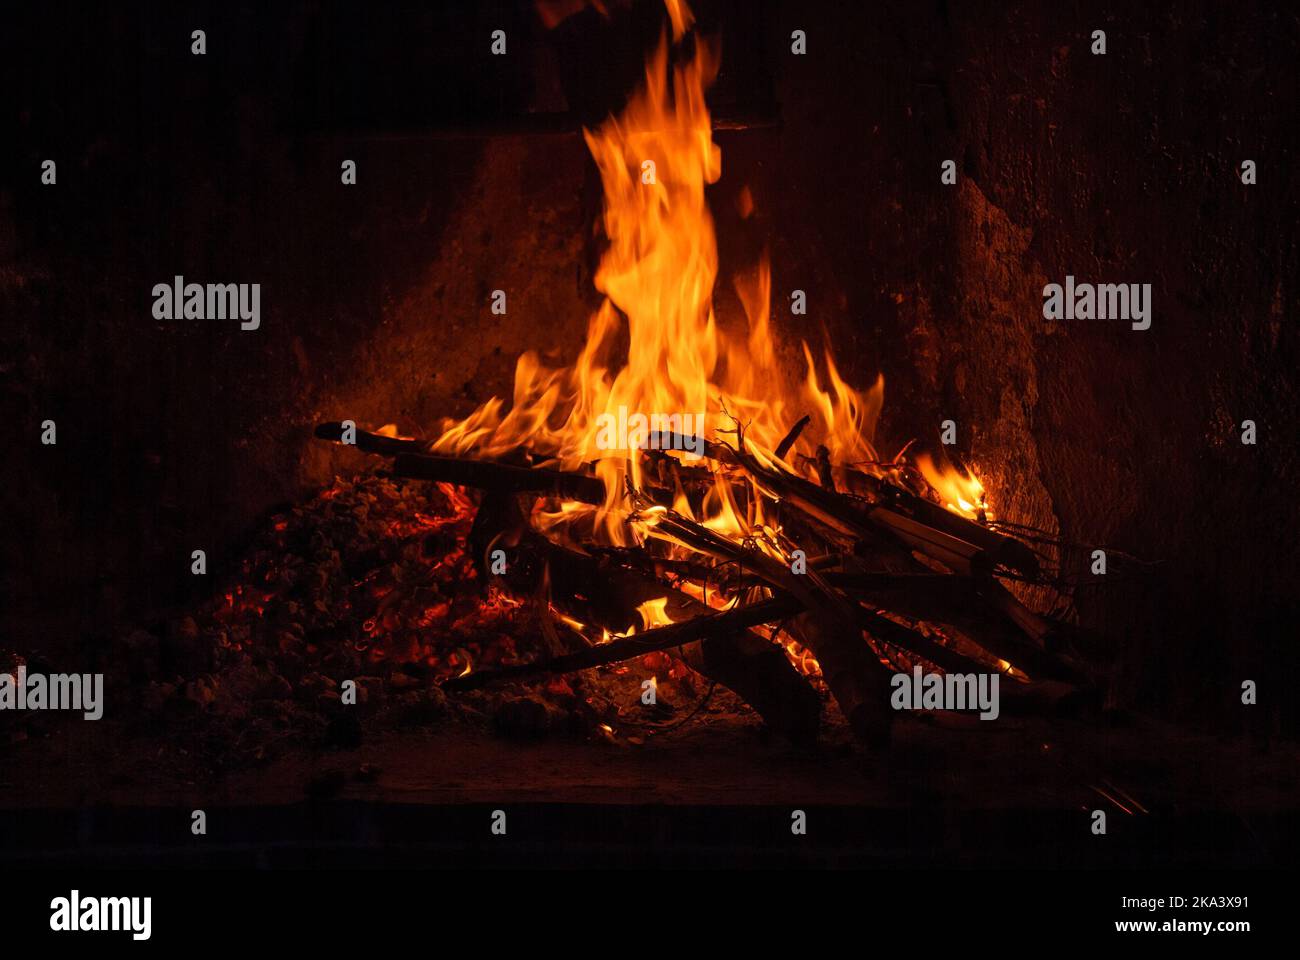 Firewood burning in corner of house, warmth of home and hypnotic image. Stock Photo